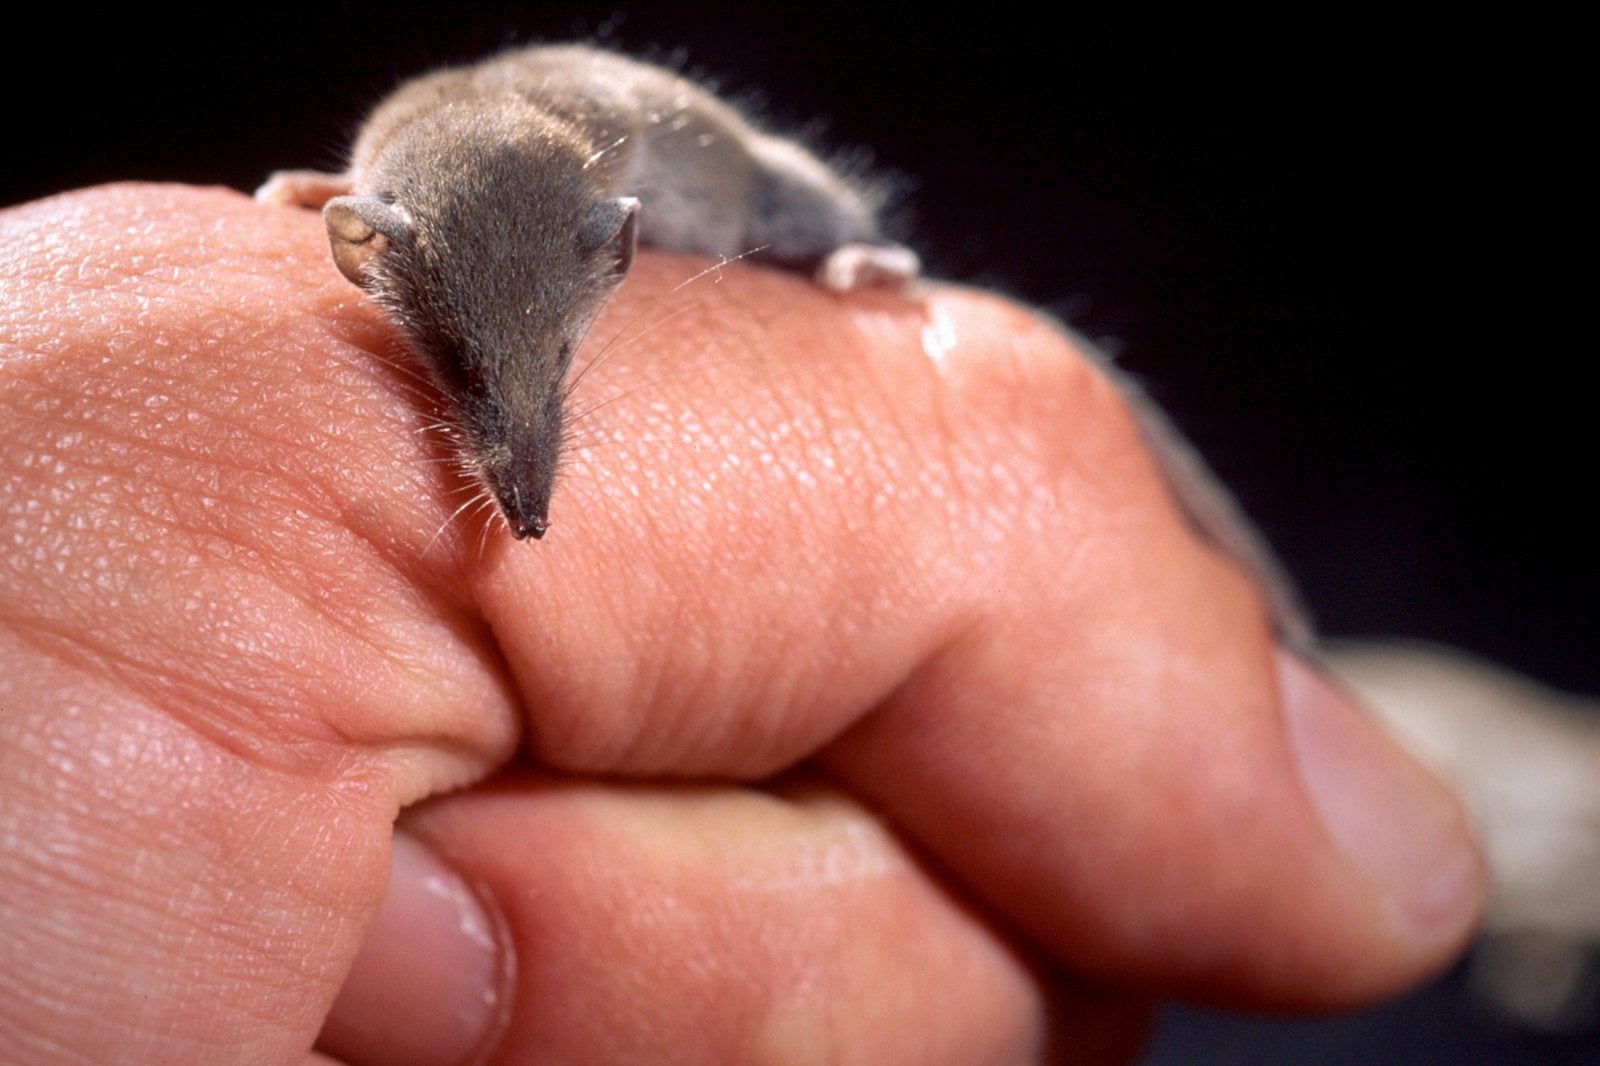 Which is smaller Etruscan shrew or bumblebee bat?